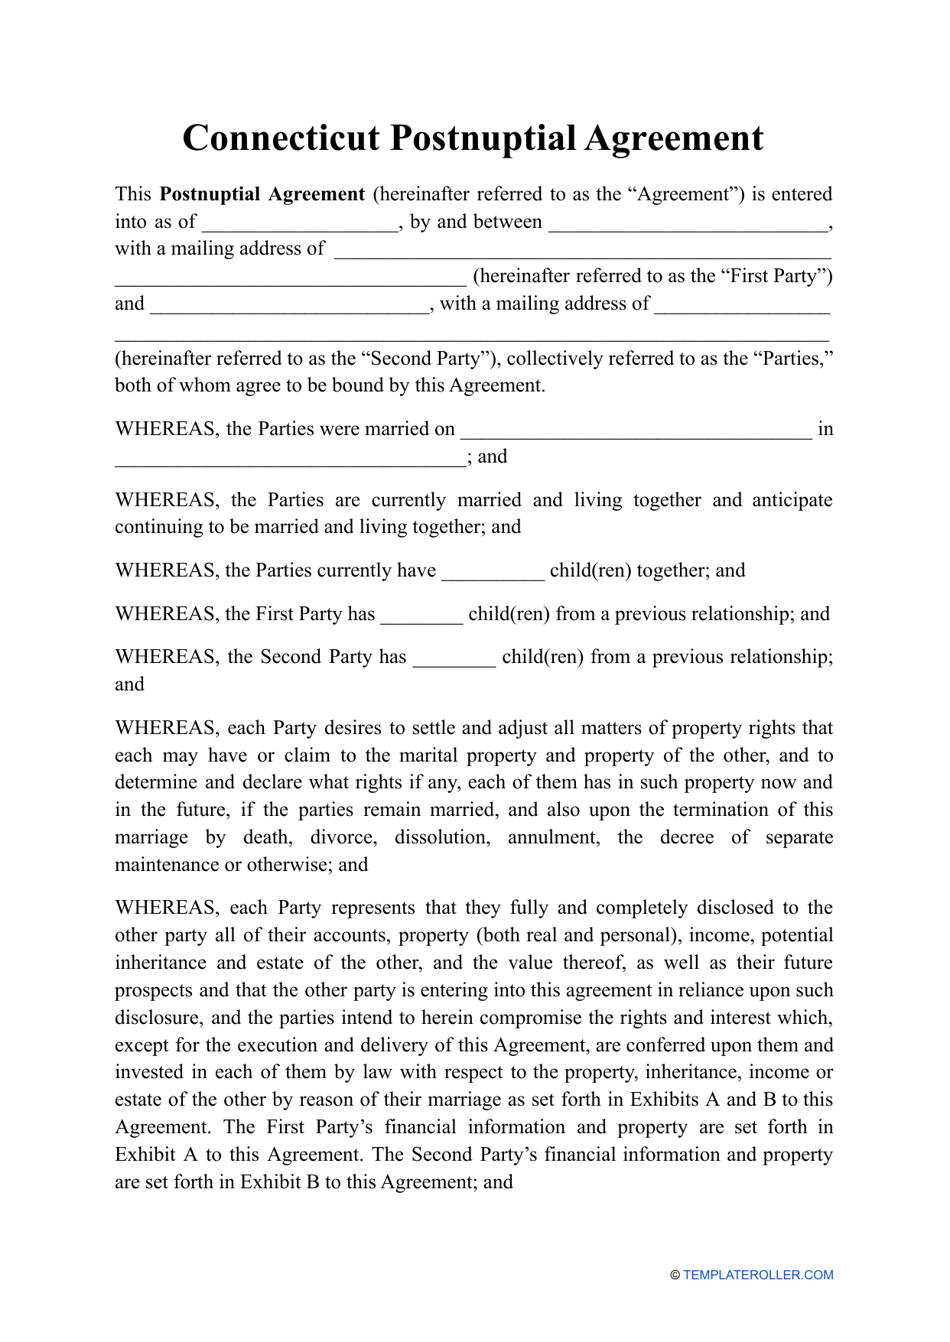 Postnuptial Agreement Template - Connecticut, Page 1